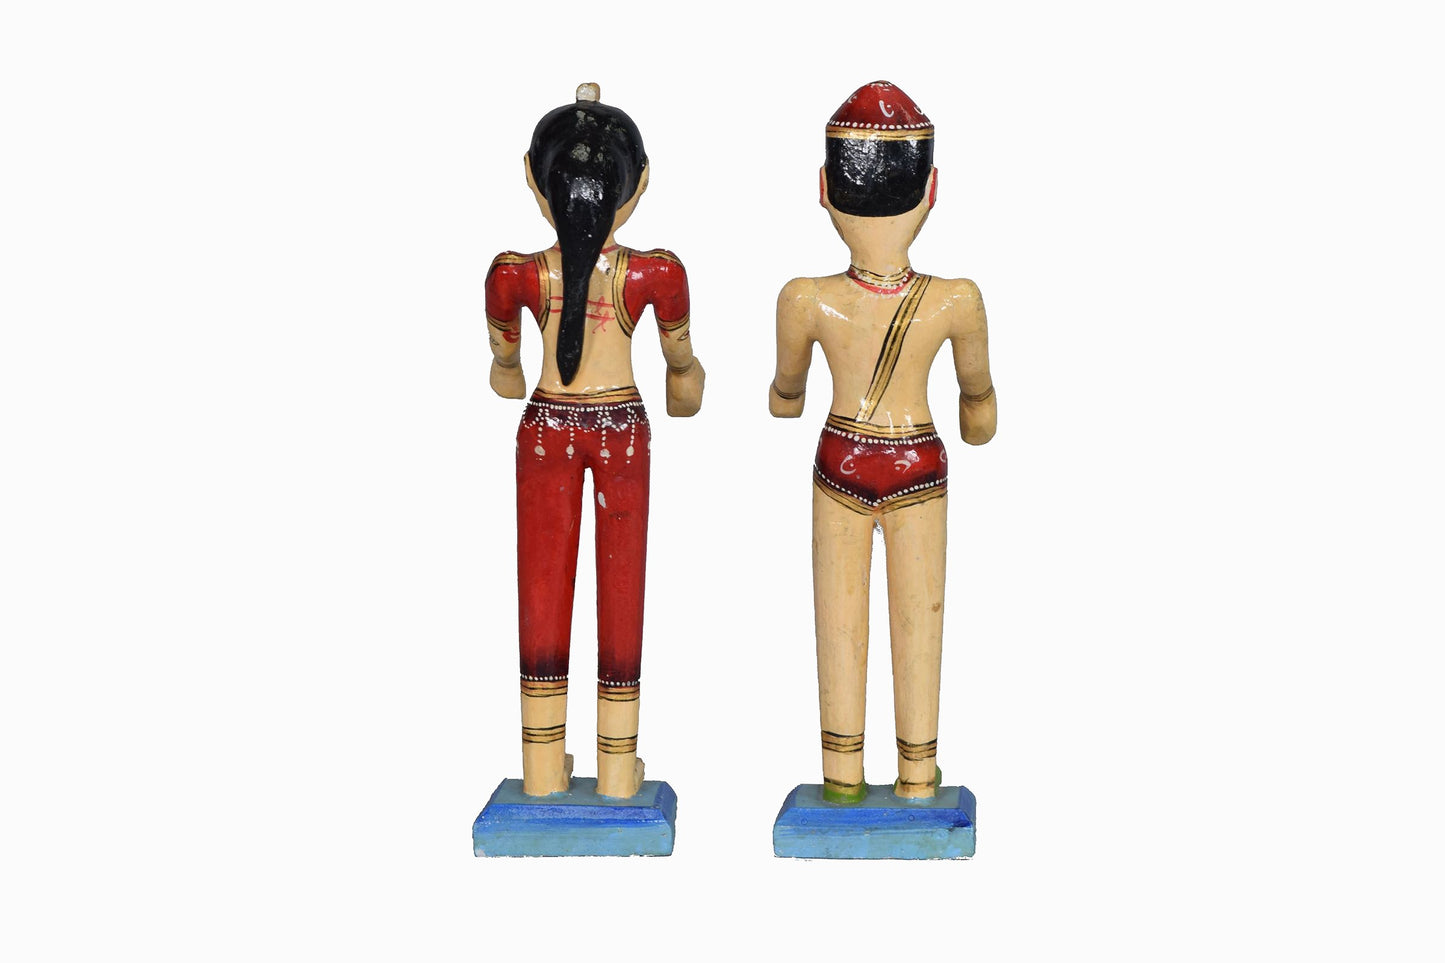 Pair of wooden Indian figurines (red)